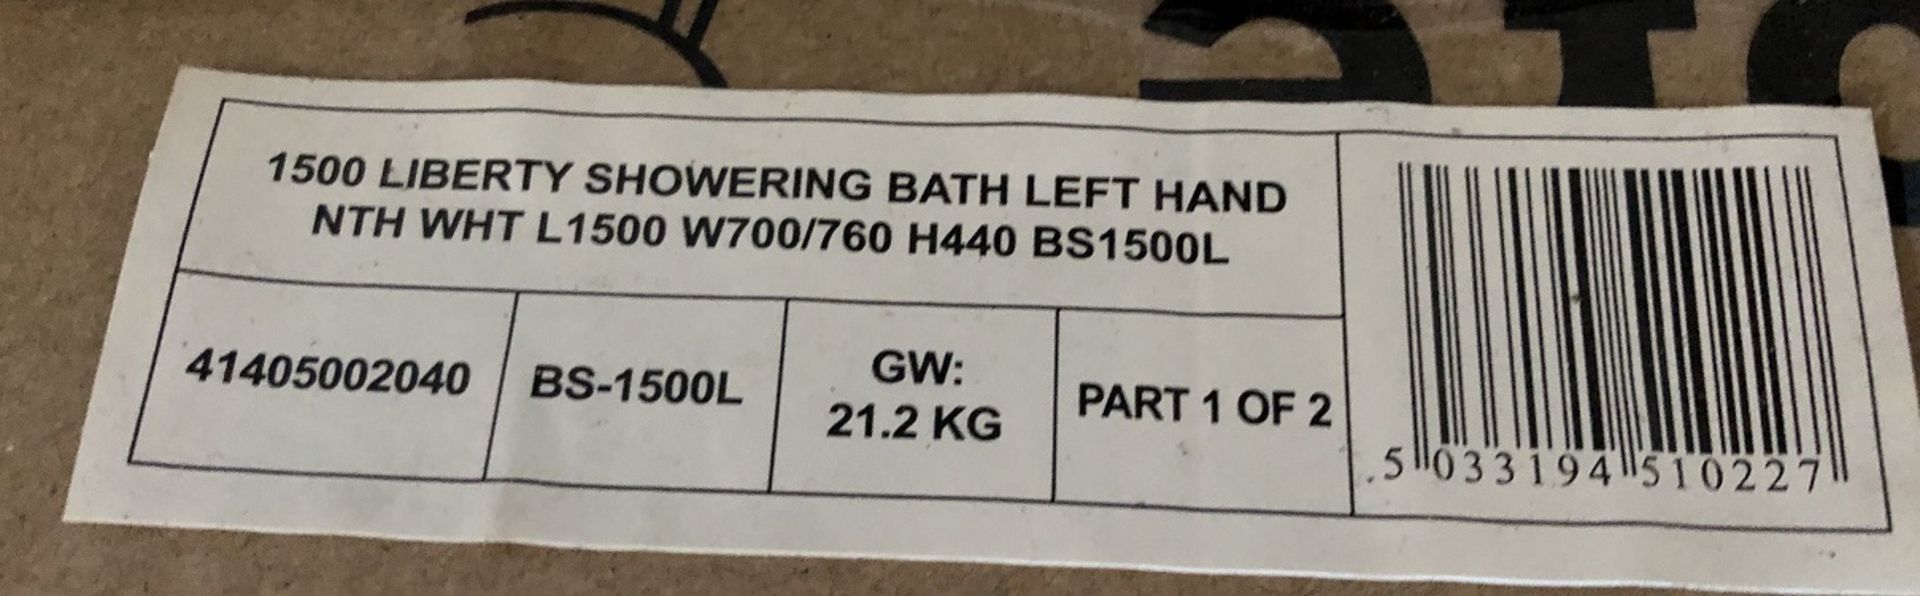 1 X LIBERTY 1500 P-SHAPED LEFT HAND SHOWERING BATH - WHITE / L1500MM W700MM H440MM / COMES WITH - Image 2 of 4